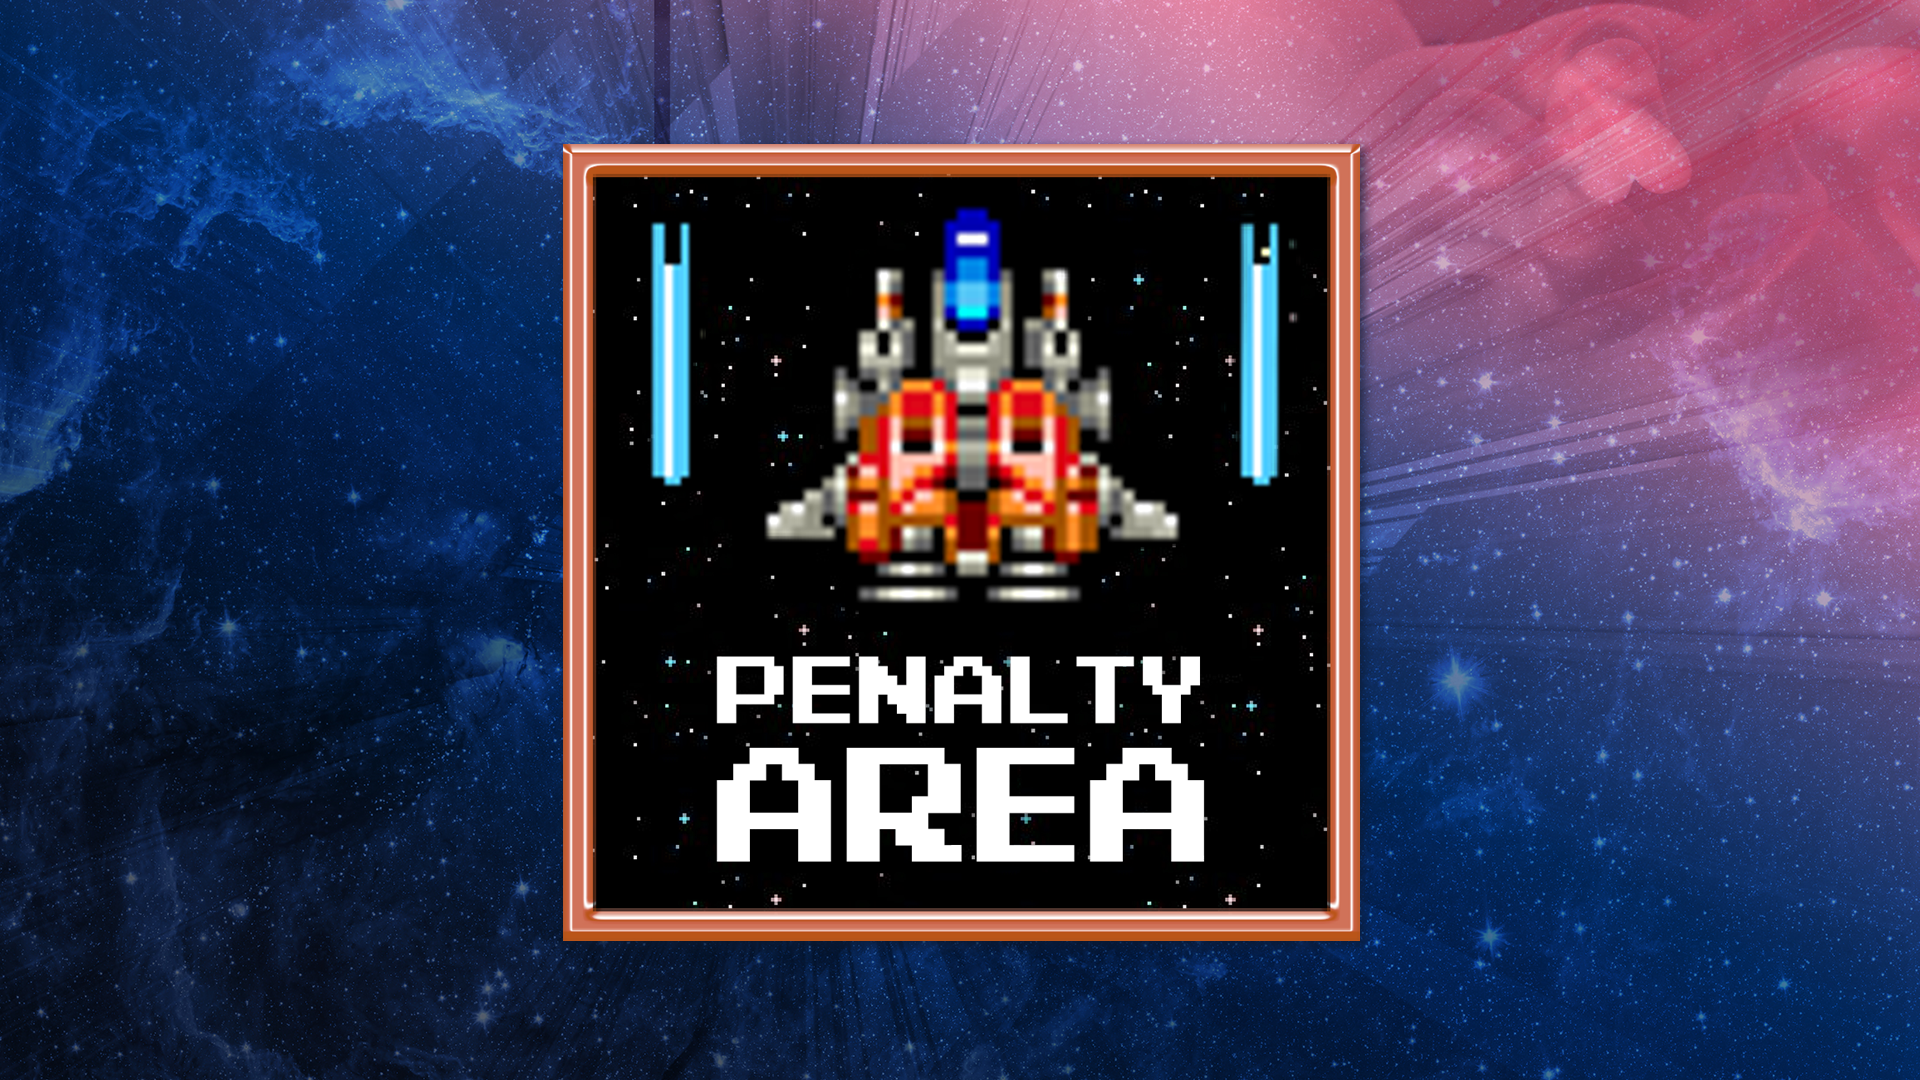 Icon for Image Fight (Arcade) - Penalty Area Passed